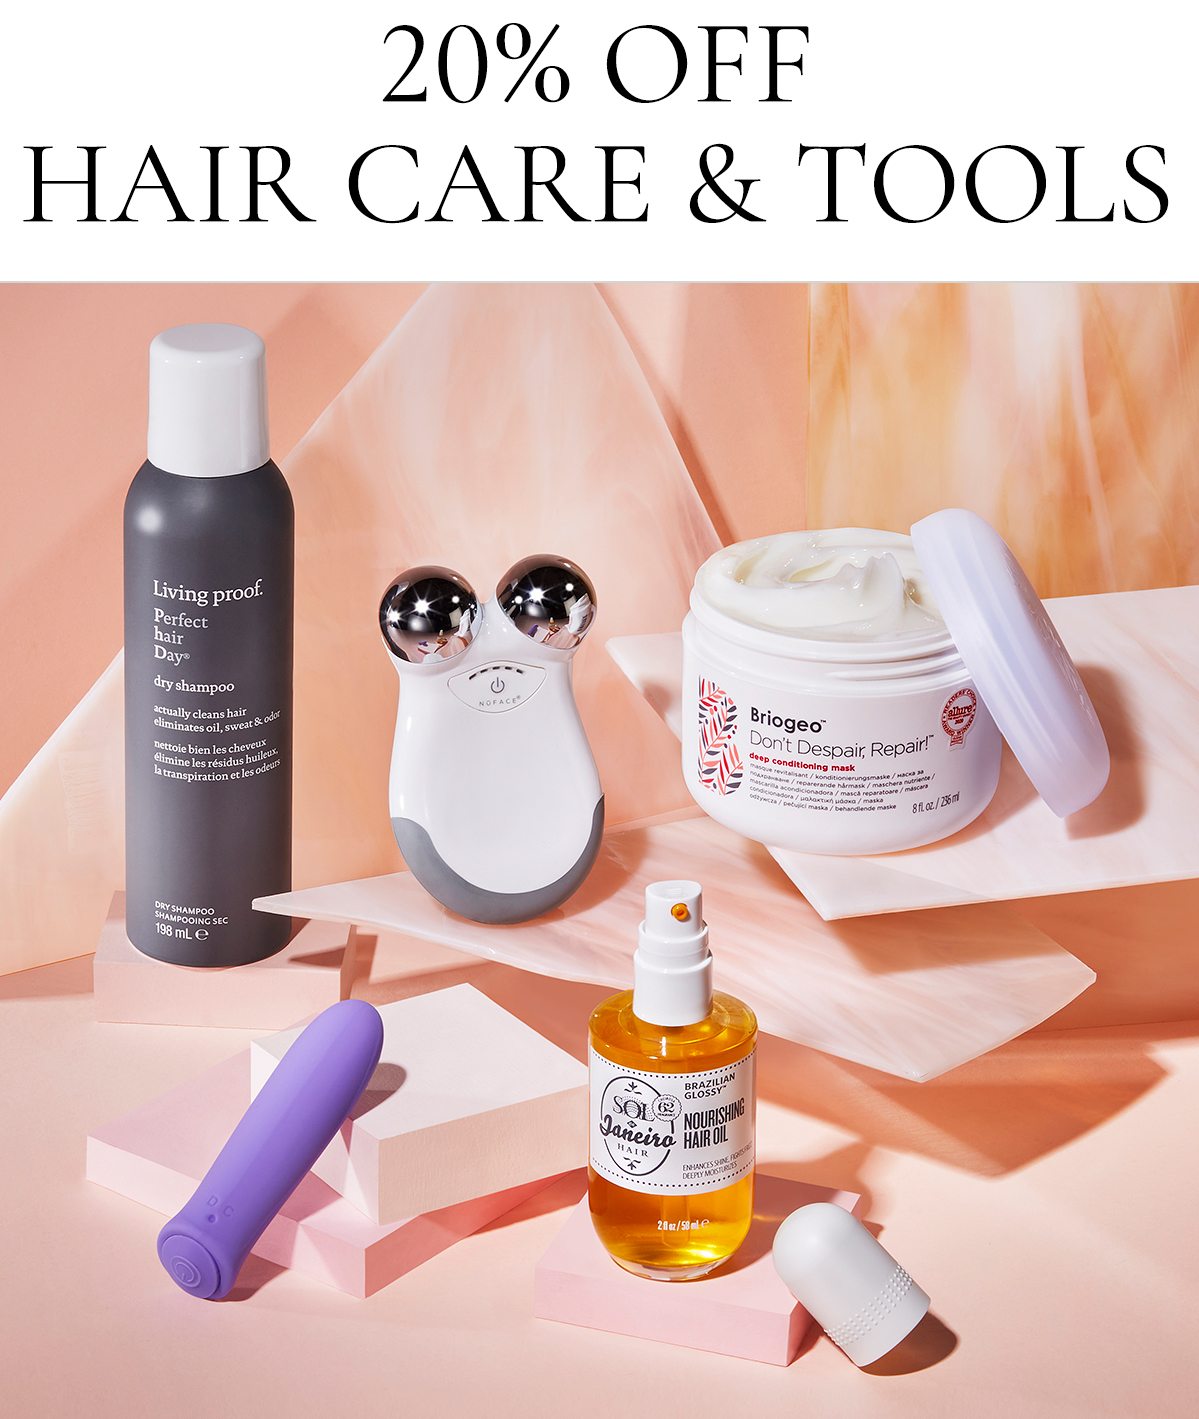 20% OFF HAIR CARE & TOOLS